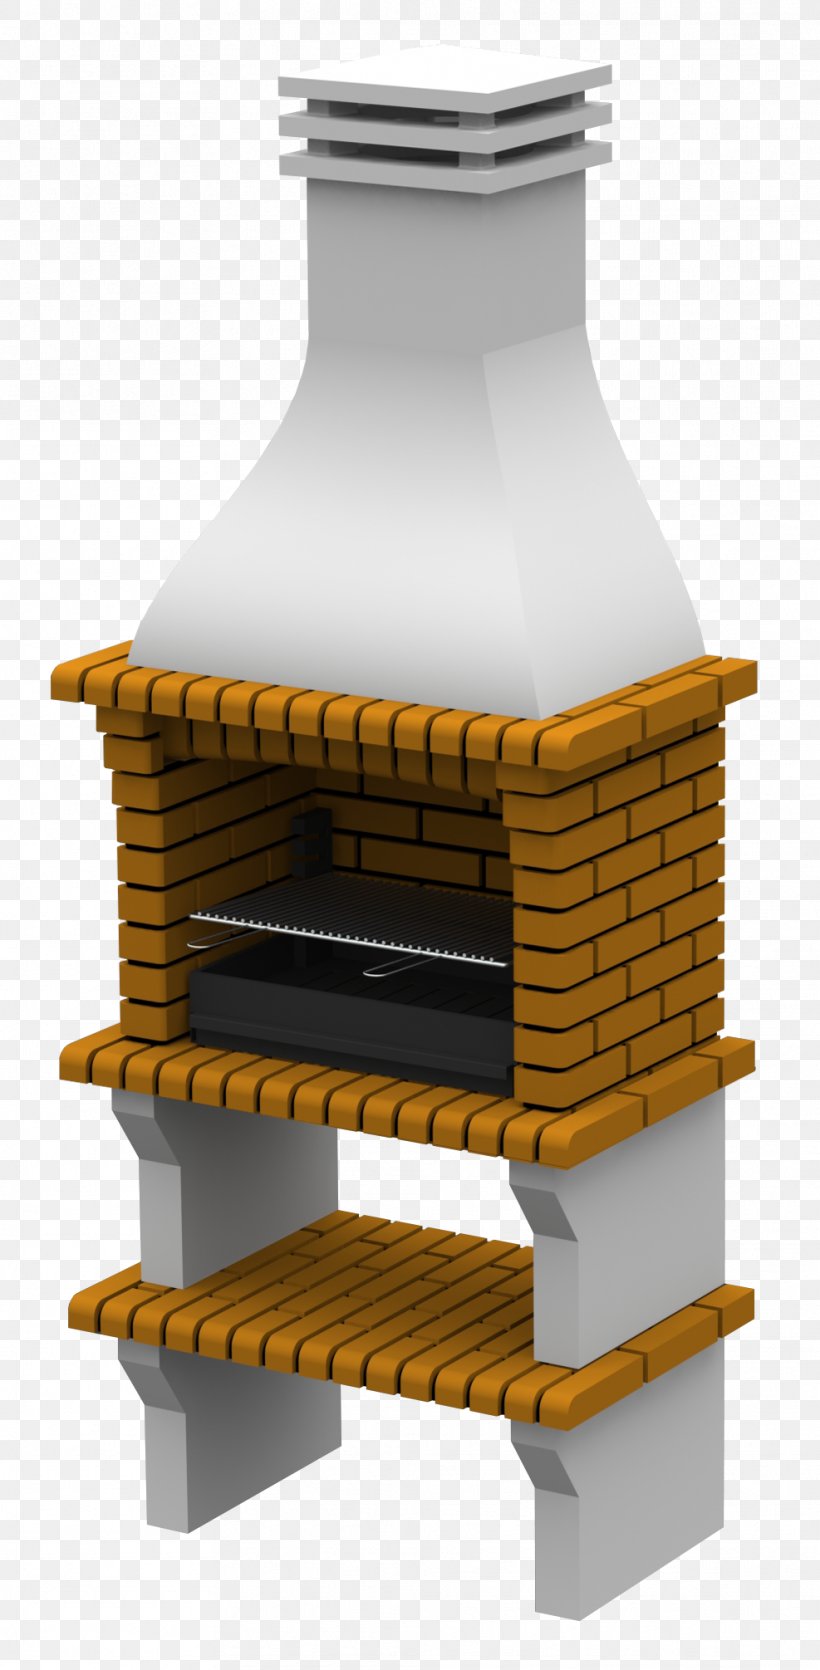 Barbecue Fire Brick Charcoal Firewood, PNG, 987x2011px, Barbecue, Brick, Cement, Ceramic, Charcoal Download Free